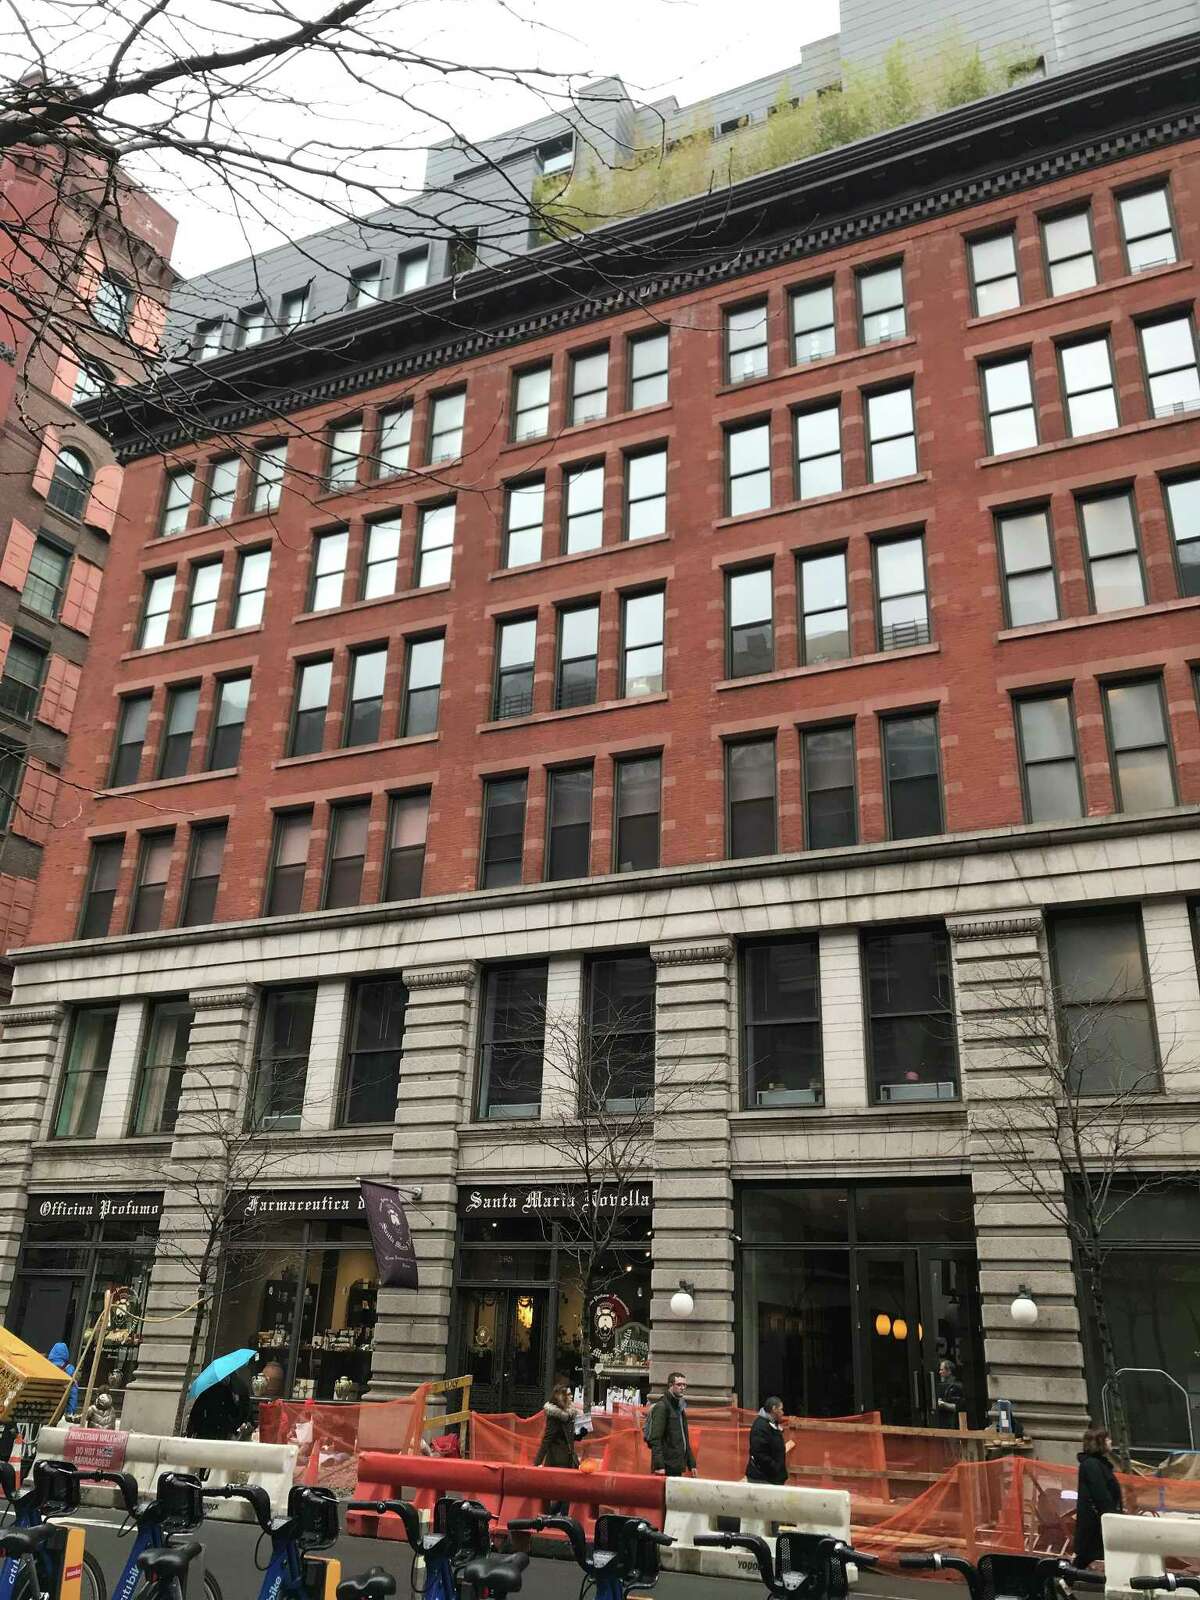 David Bowie lived at 285 Lafayette St., the site of a onetime chocolate factory.